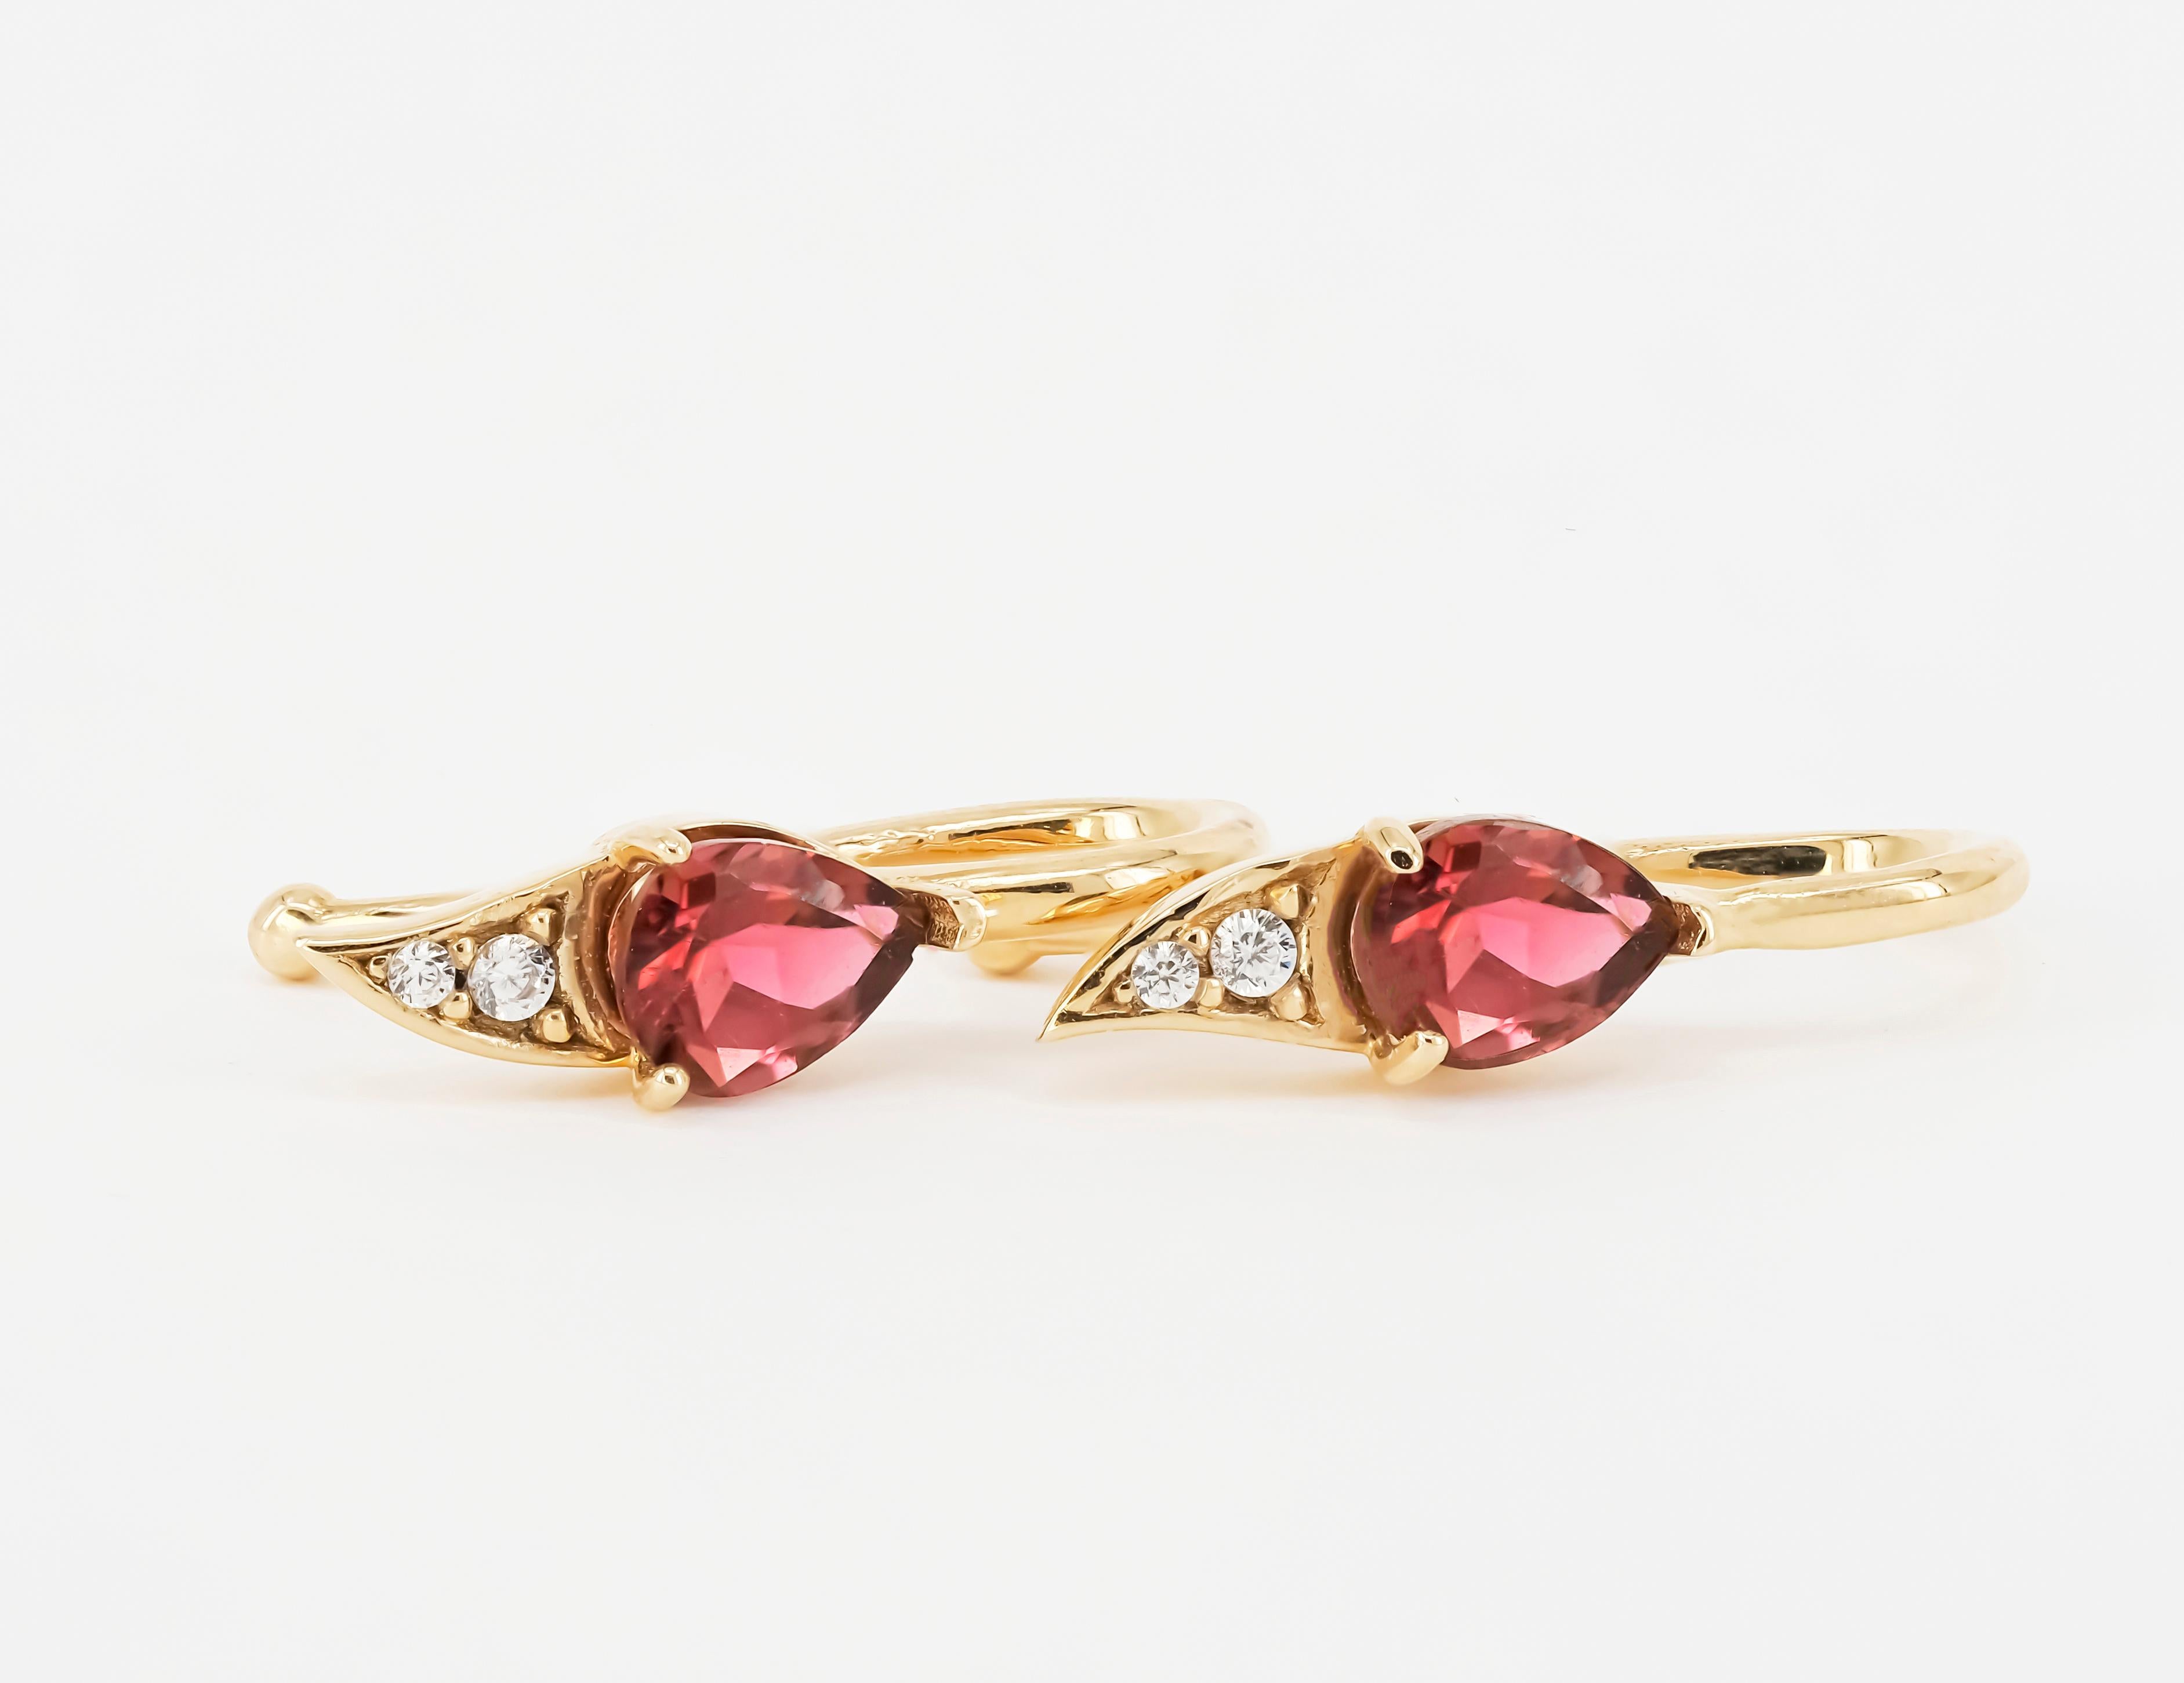 Pink Tourmaline Earrings in 14k Yellow Gold For Sale 2